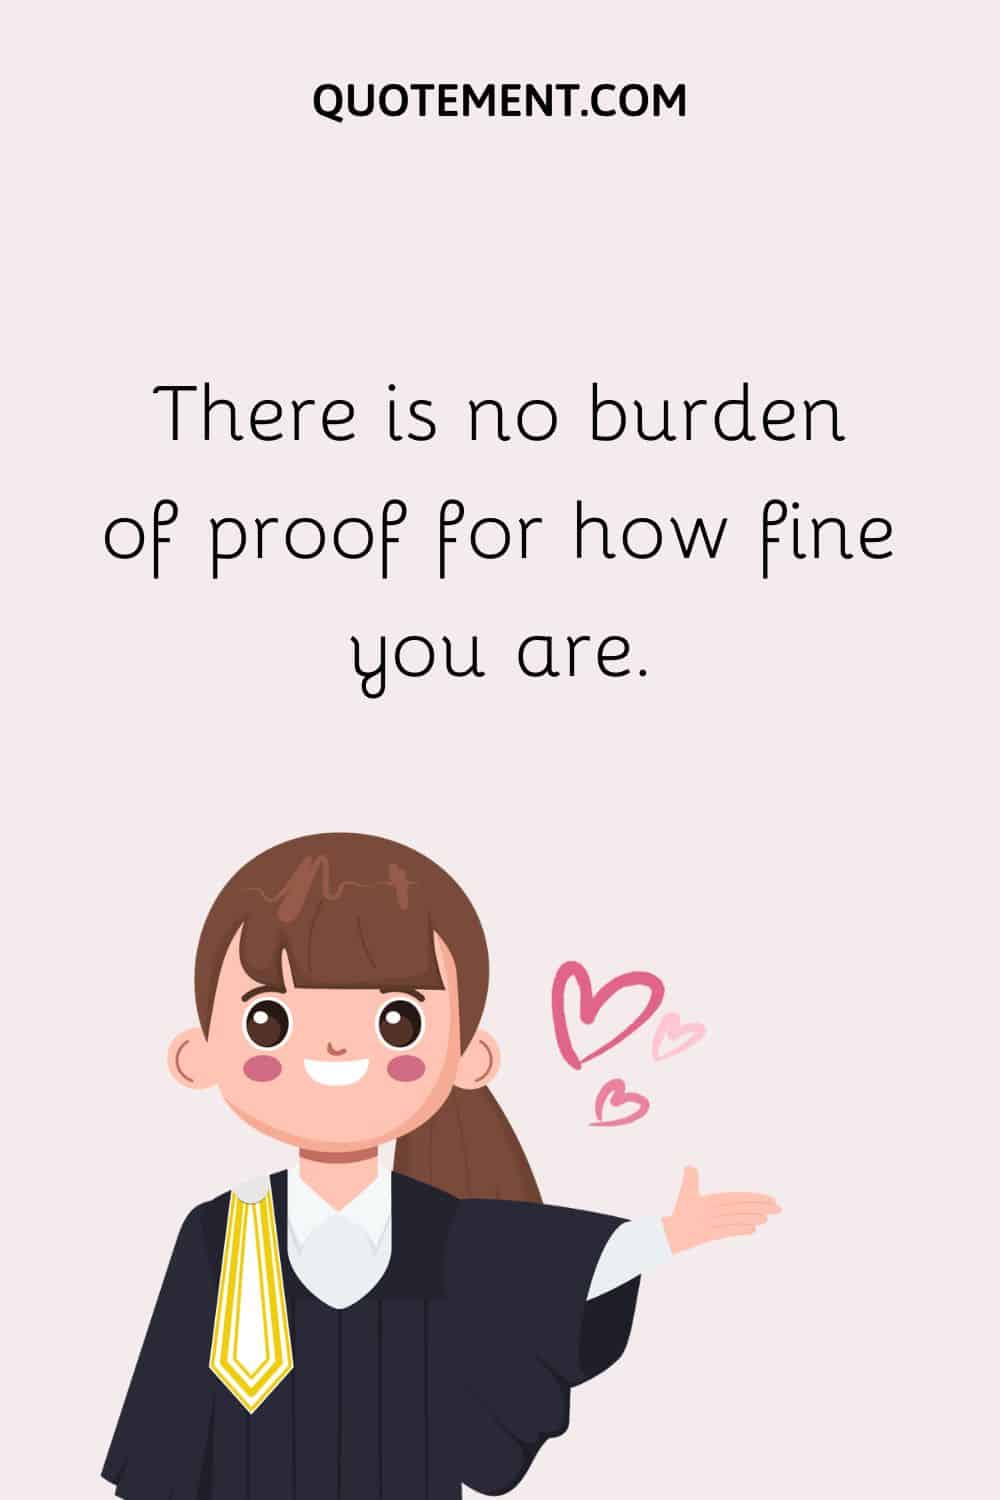 There is no burden of proof for how fine you are